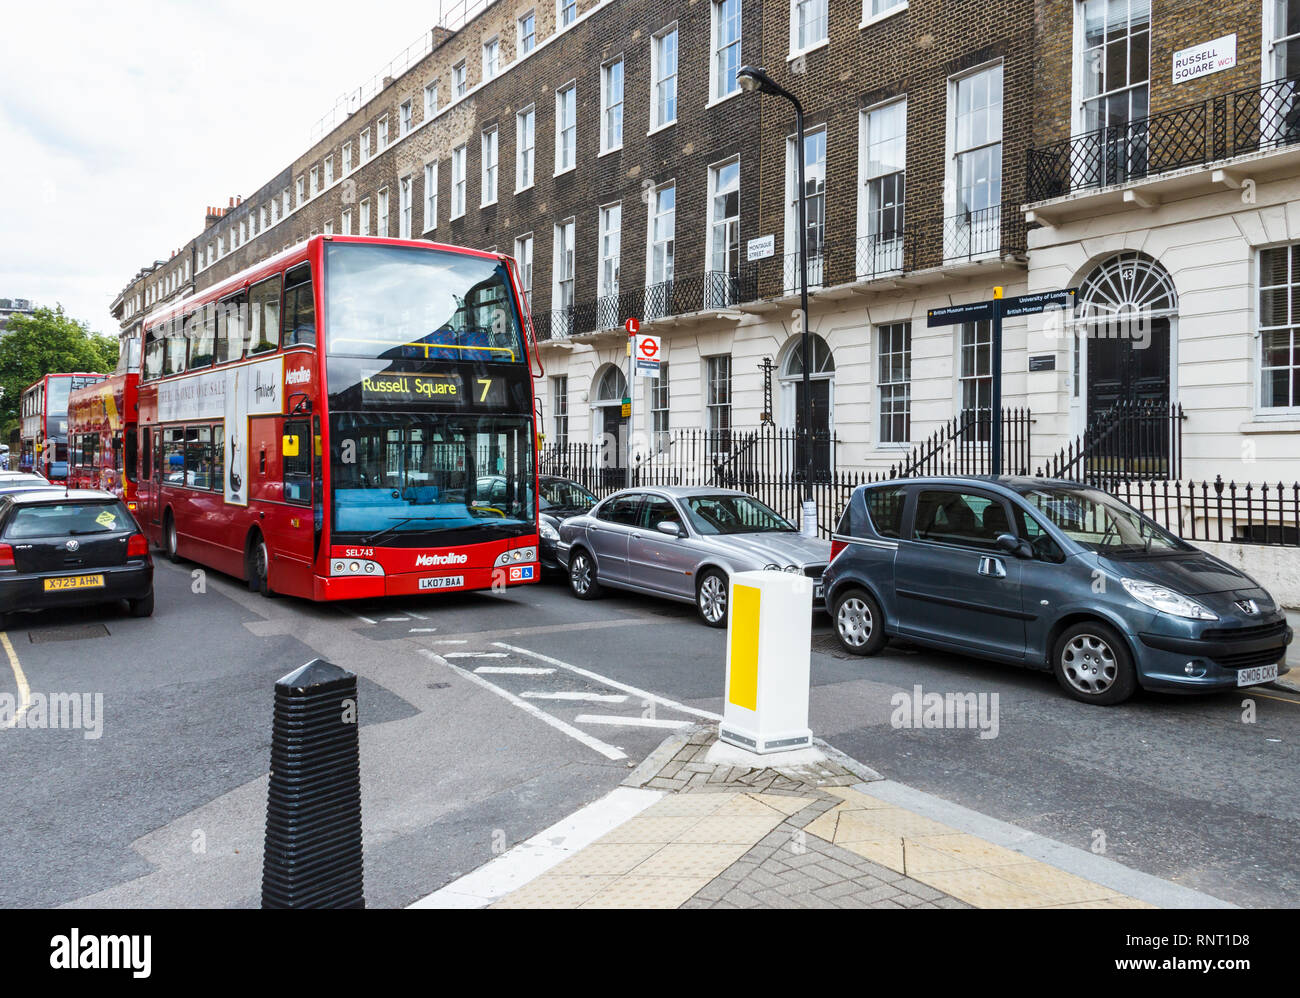 Buses unable to pass because of inconsiderate parking in Montague Street, London, UK Stock Photo